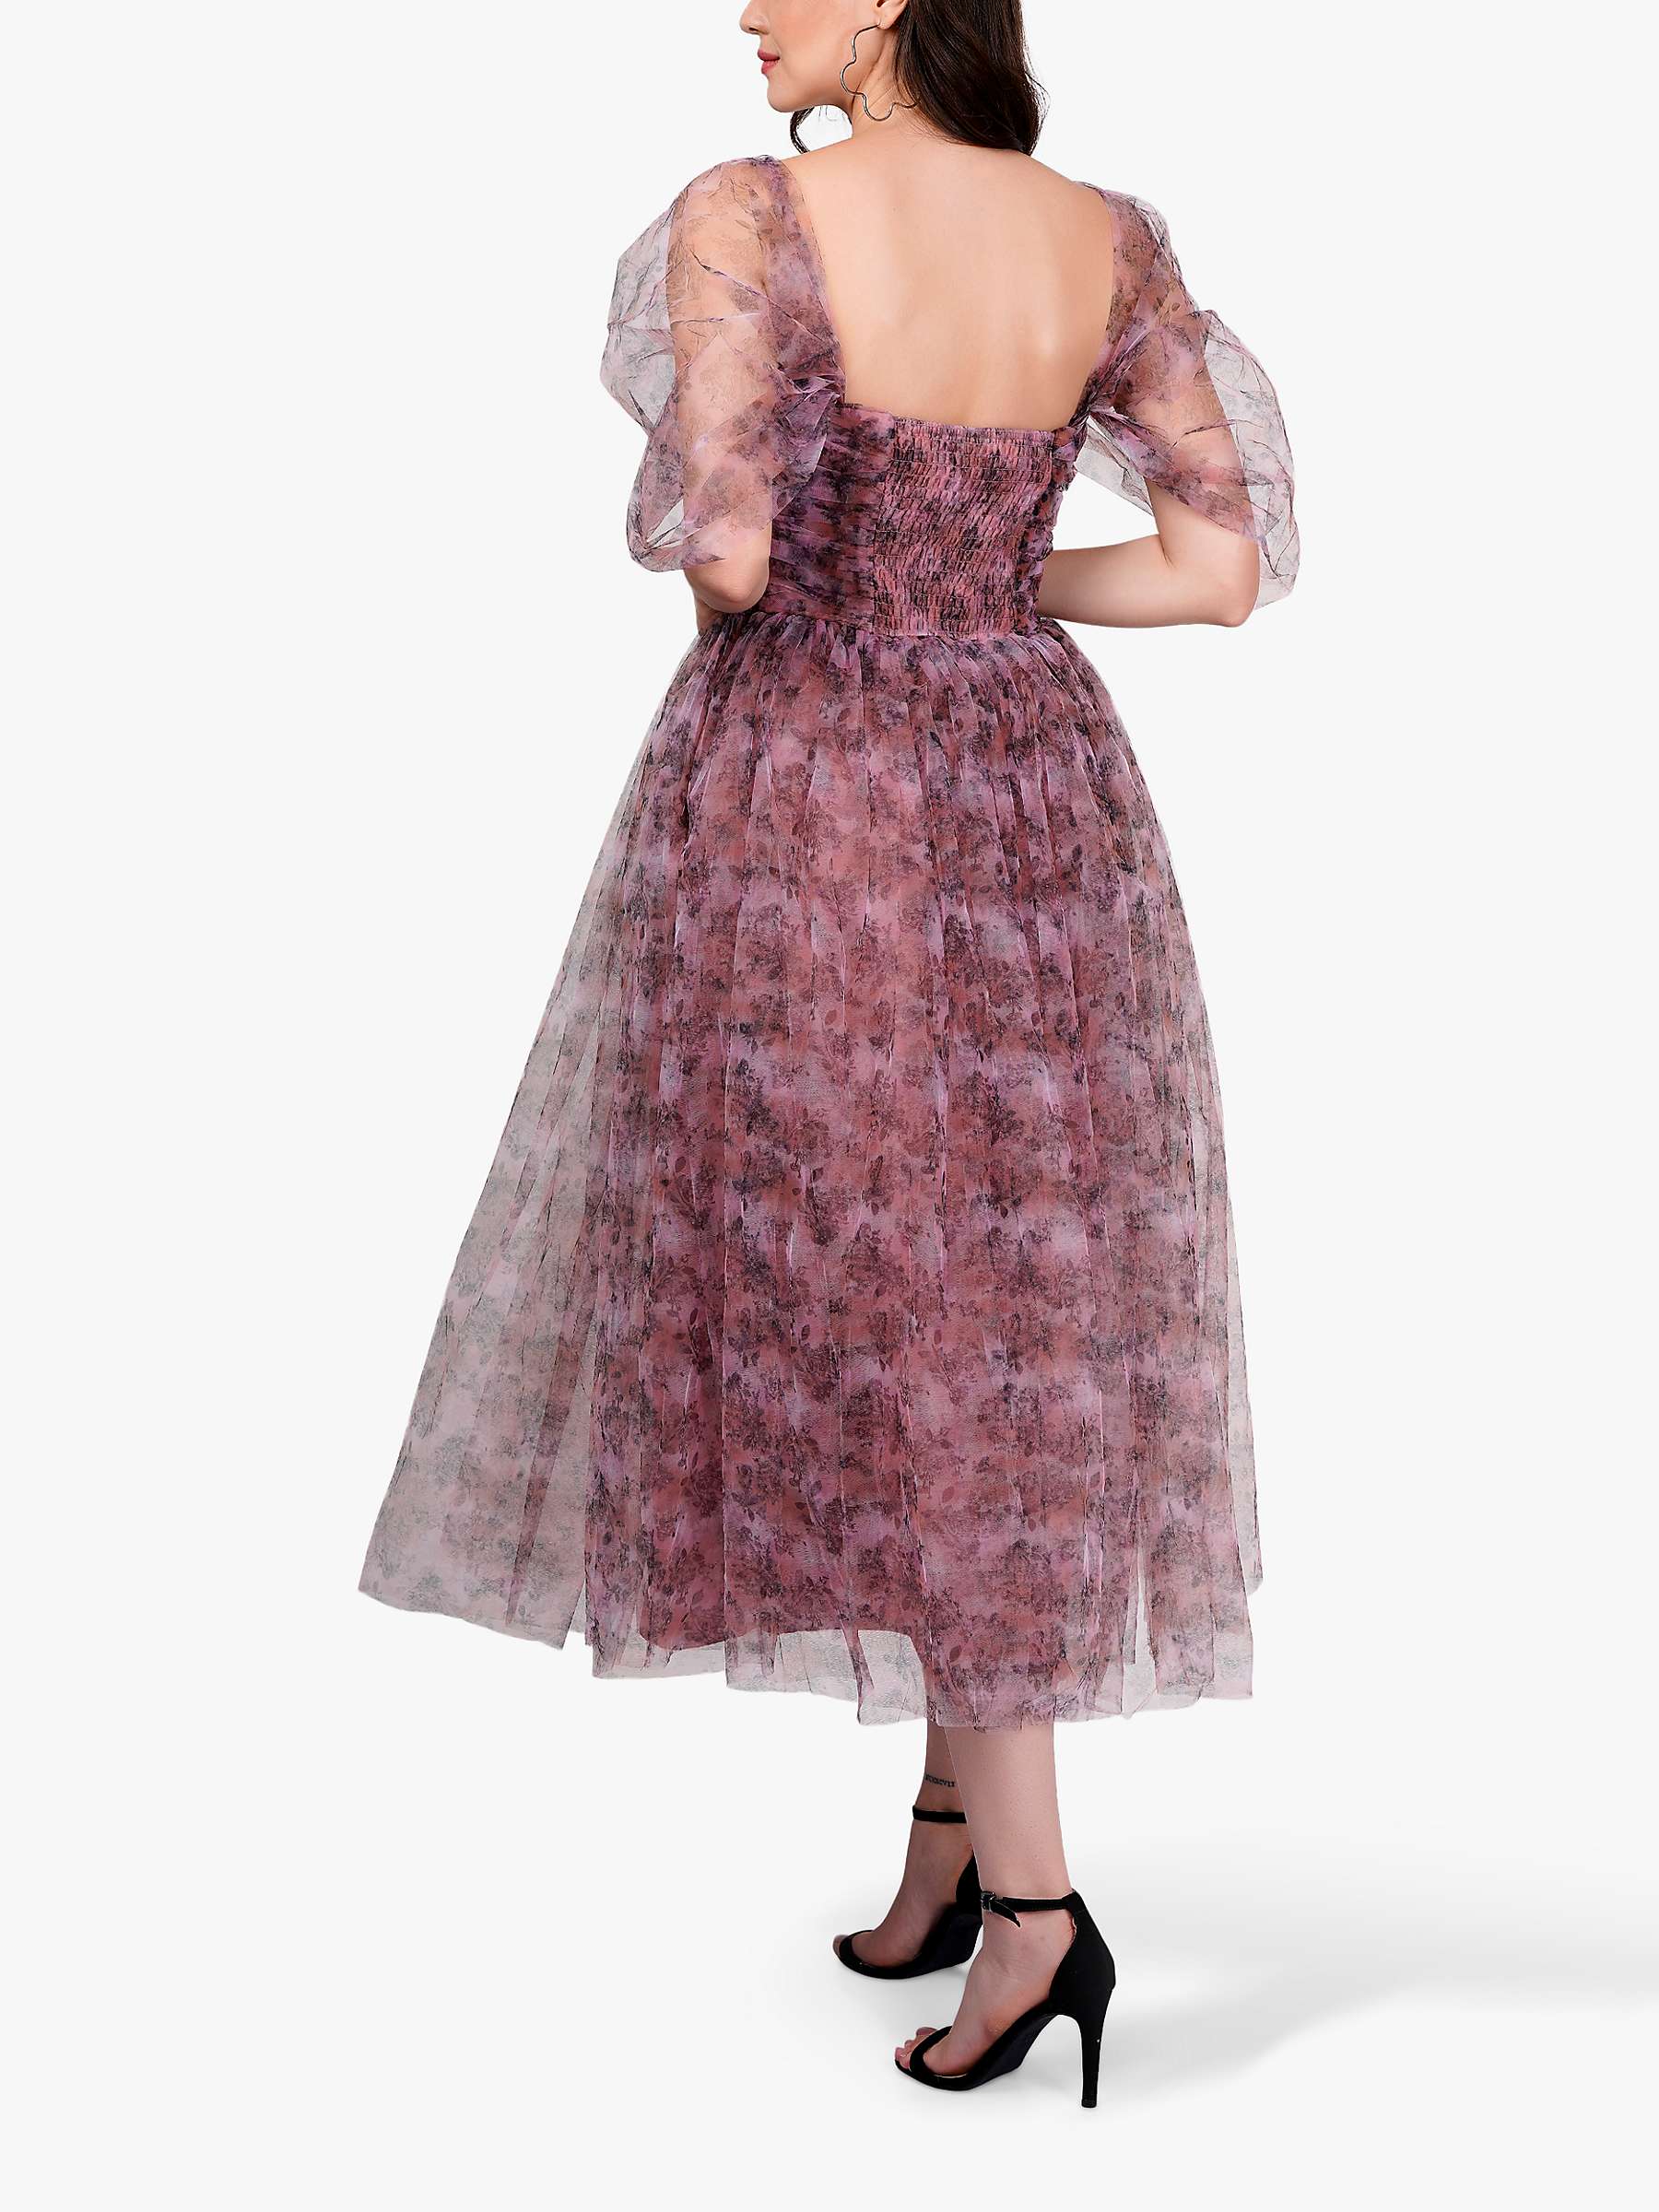 Buy Lace & Beads Melbourne Tulle Midi Dress, Floral Pink Online at johnlewis.com